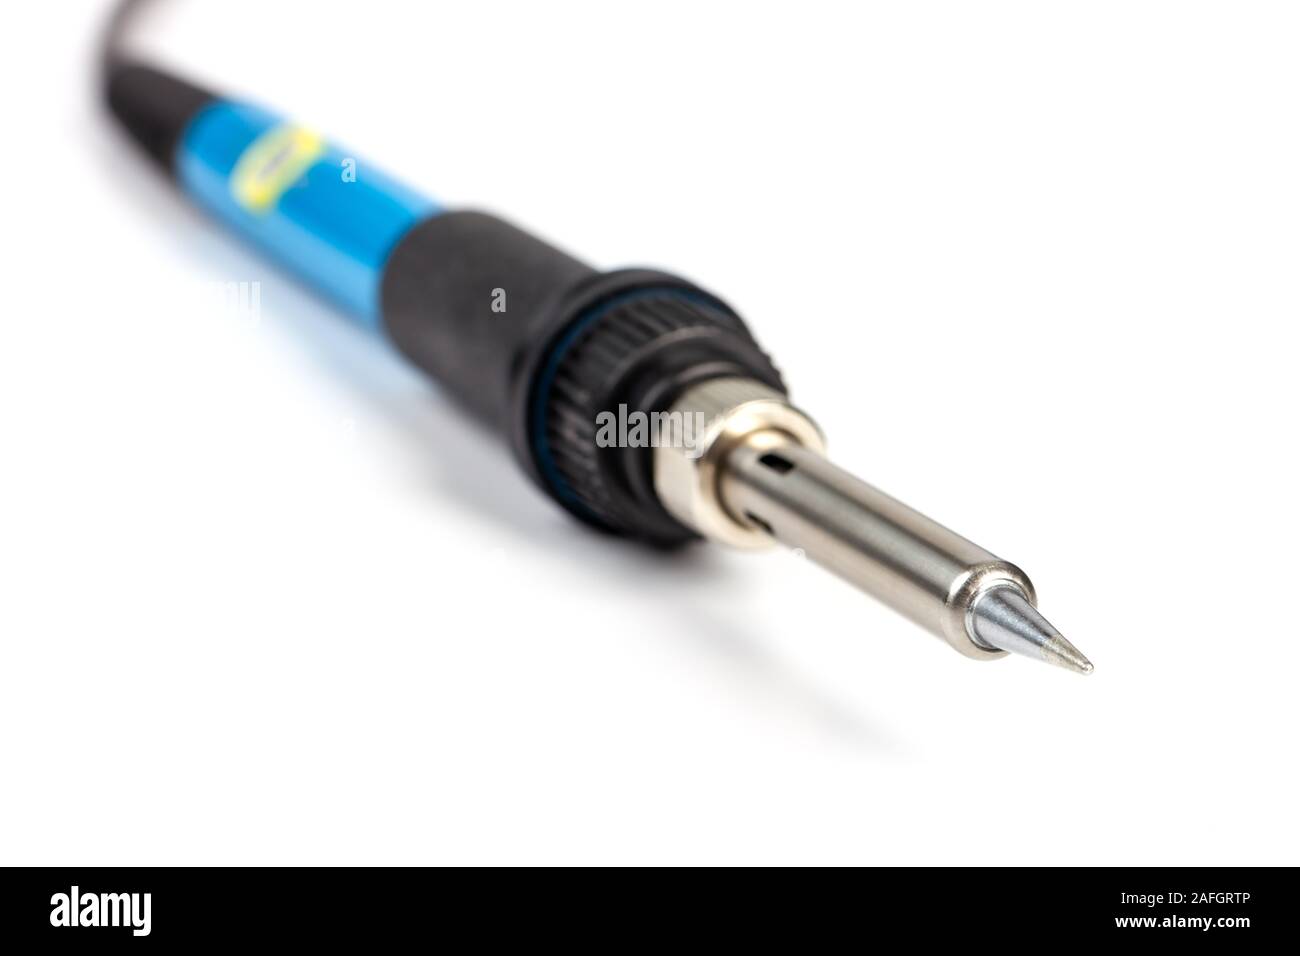 Close-up of a soldering iron tip with a blue handle on white background. Stock Photo